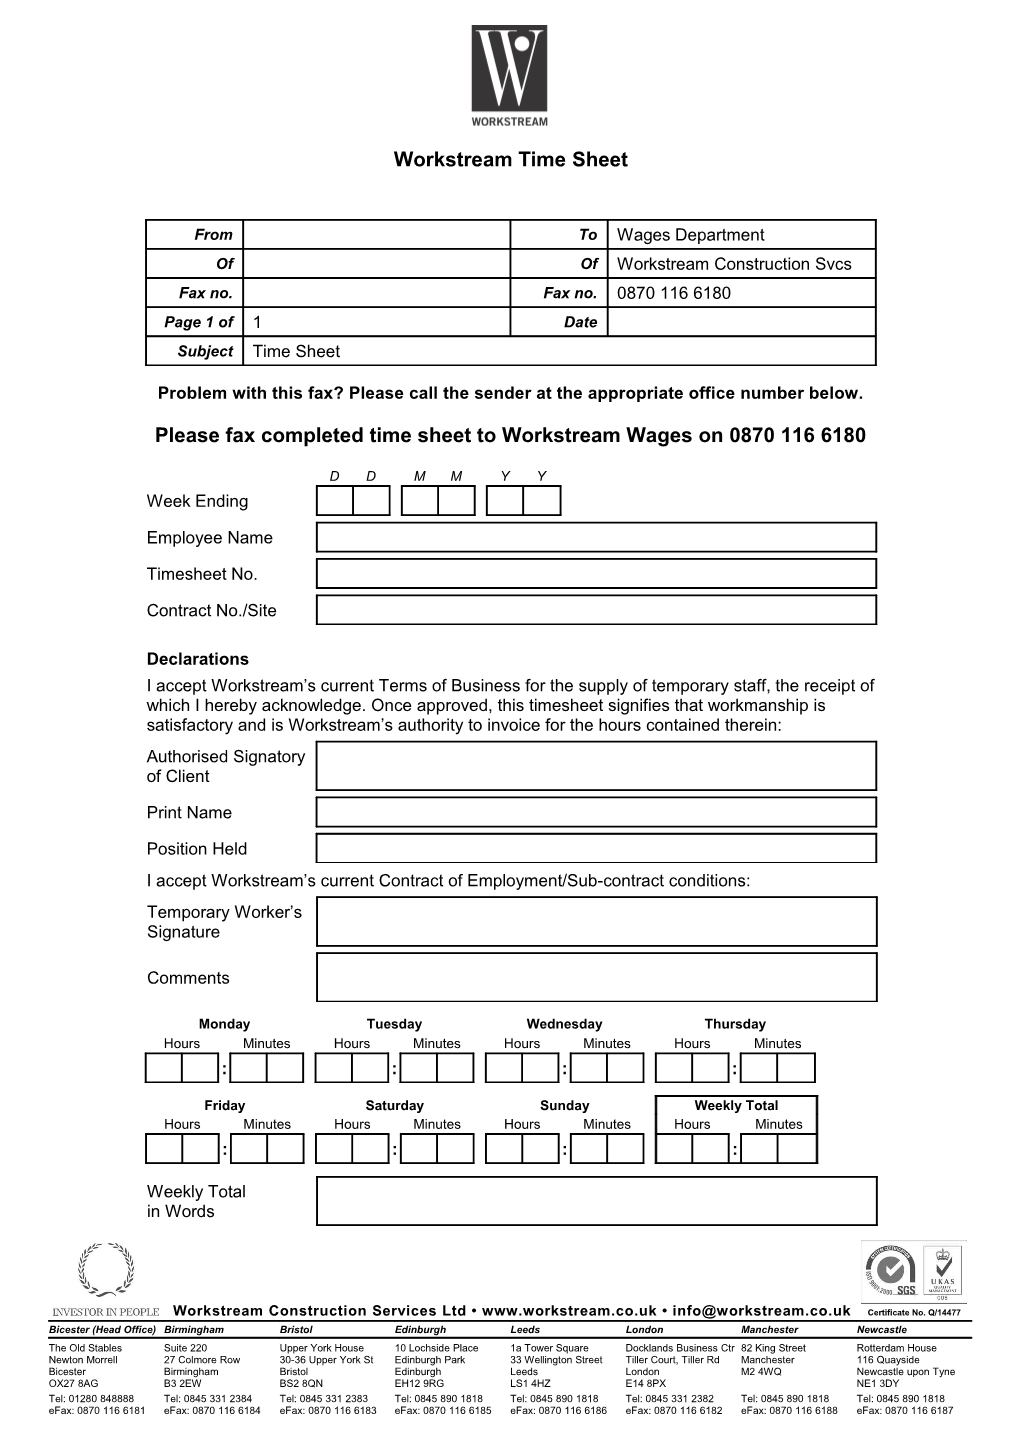 Please Fax Completed Time Sheet to Workstream Wages on 0870 116 6180